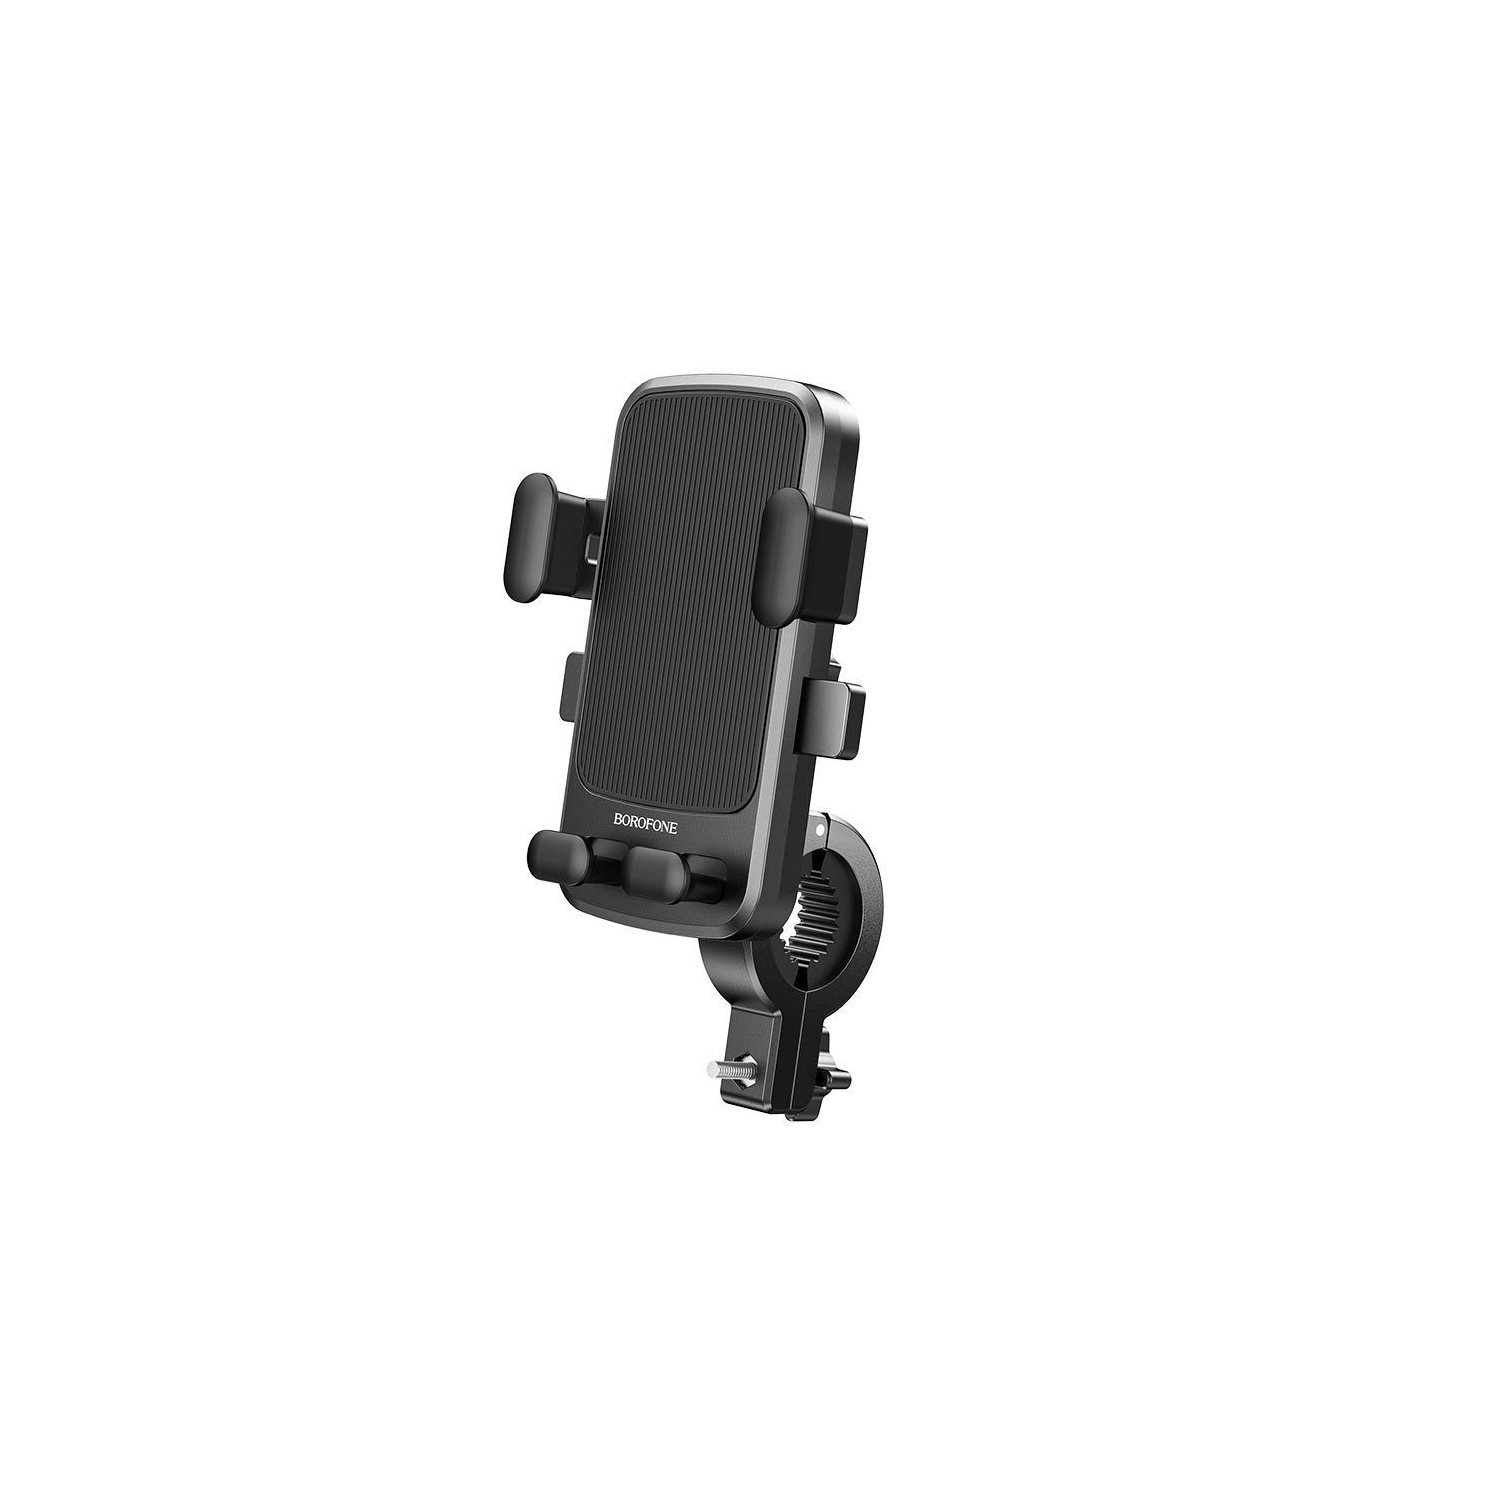 Rotatable Hands Free Adjustable Handlebar Cell Phone Holder Mount for Bicycle Bike Motorcycle Stroller